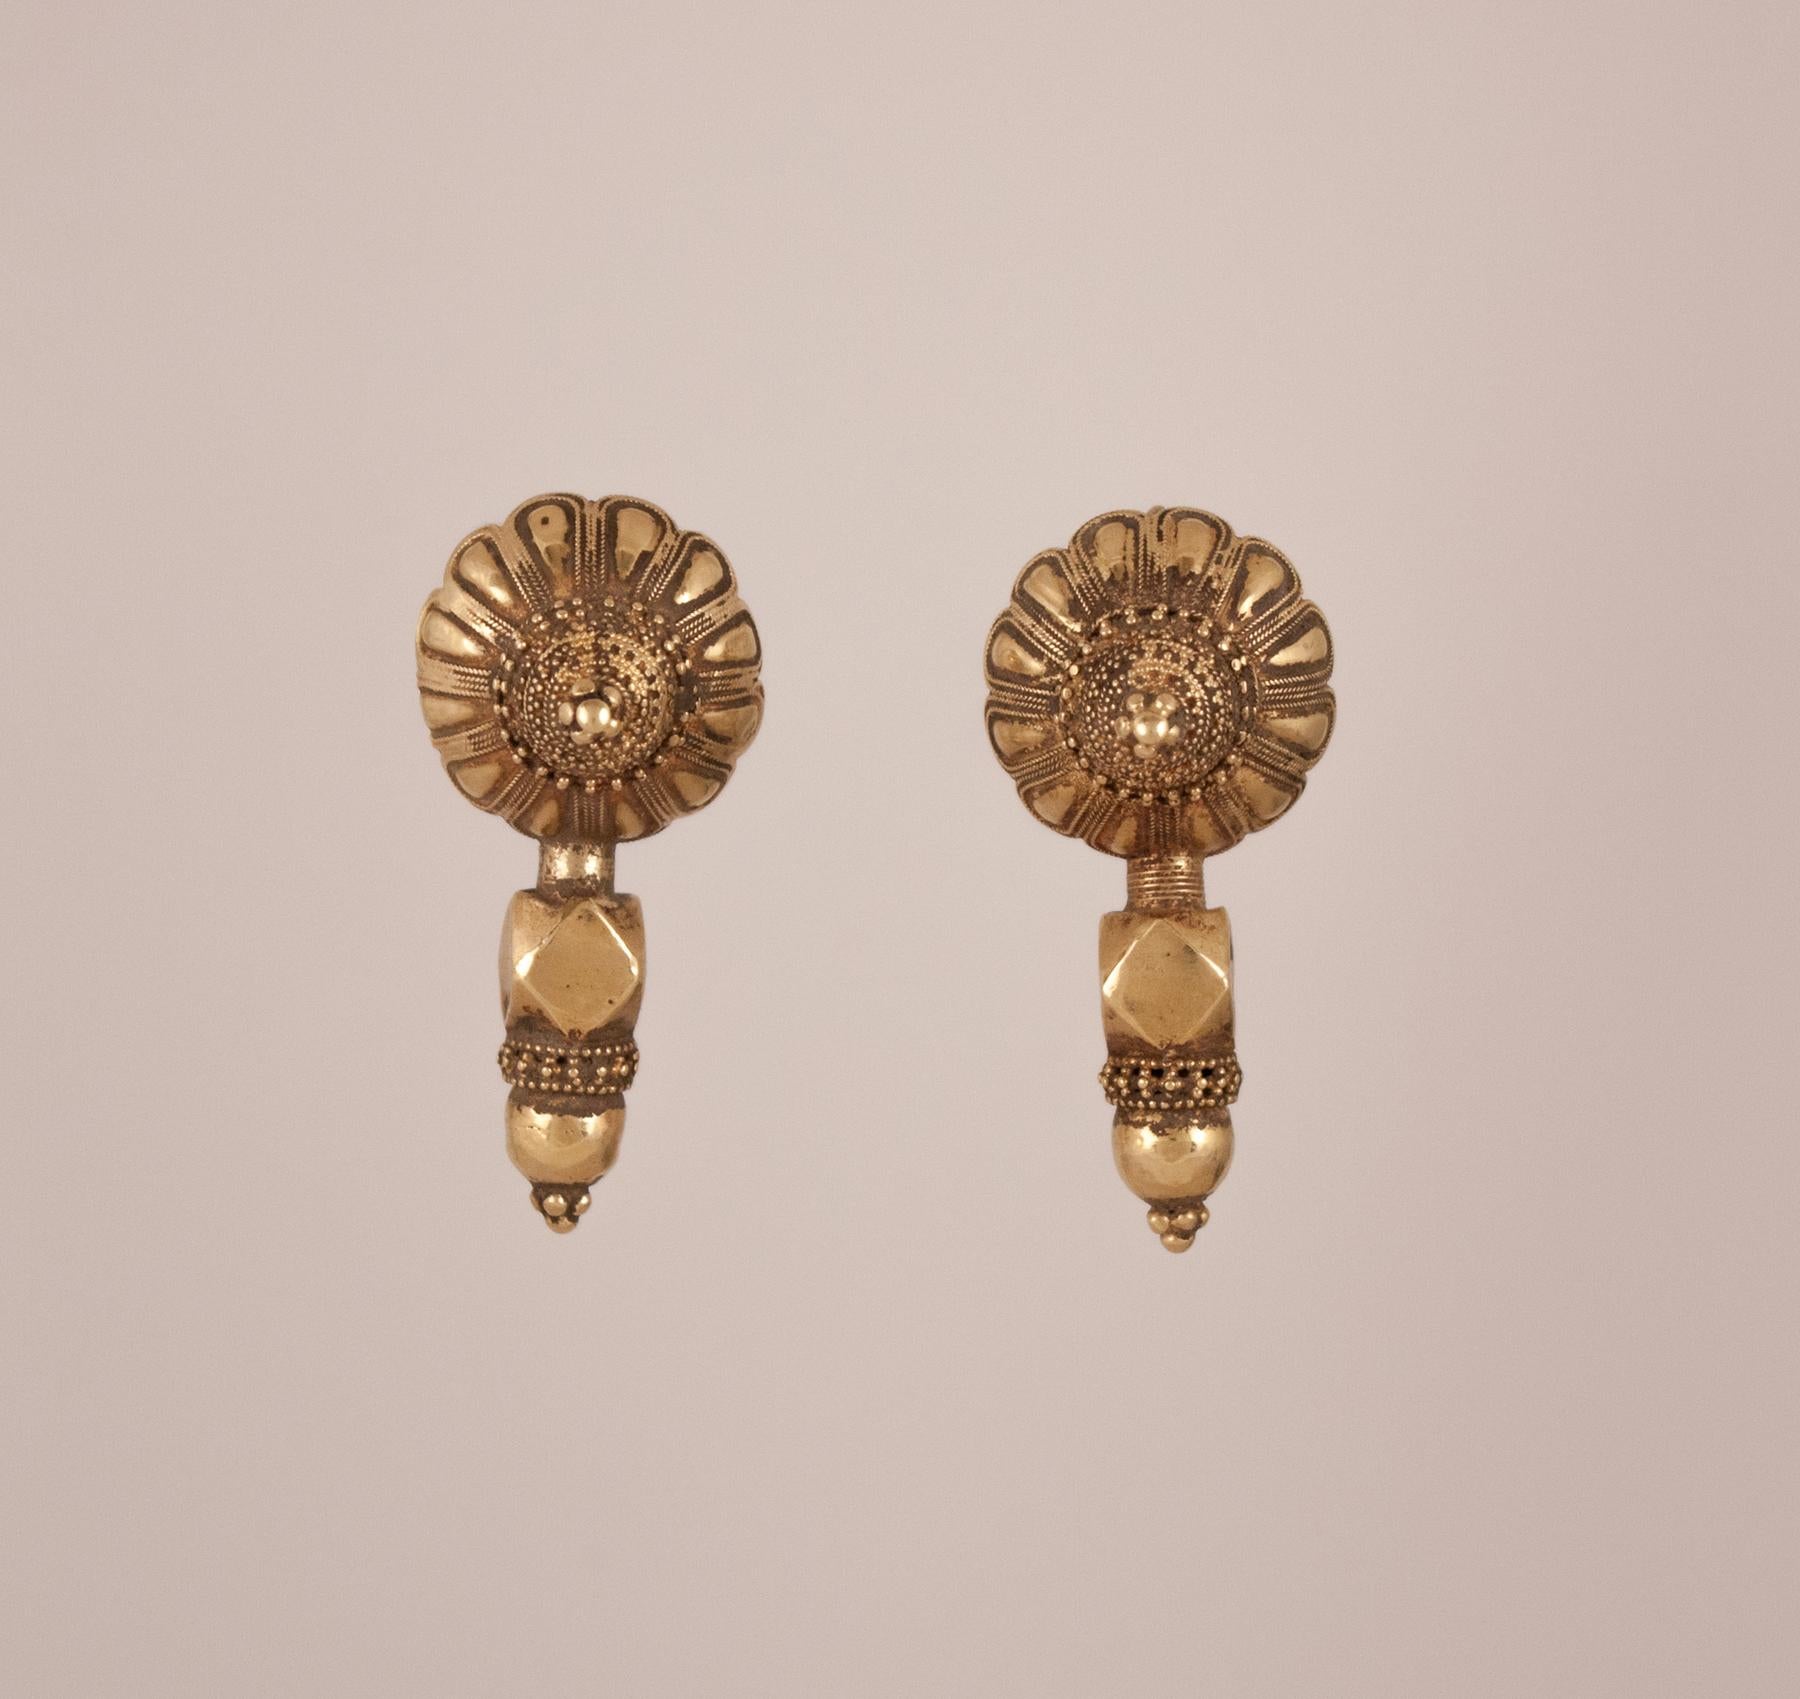 A collector's pair of traditional 18 karat gold fixed wire earrings from Northern India. These circa 1950 ethnic works of art have a wonderfully worn patina and feature hand tooled lotus blossoms, fine granulation work and geometric beads. The wires